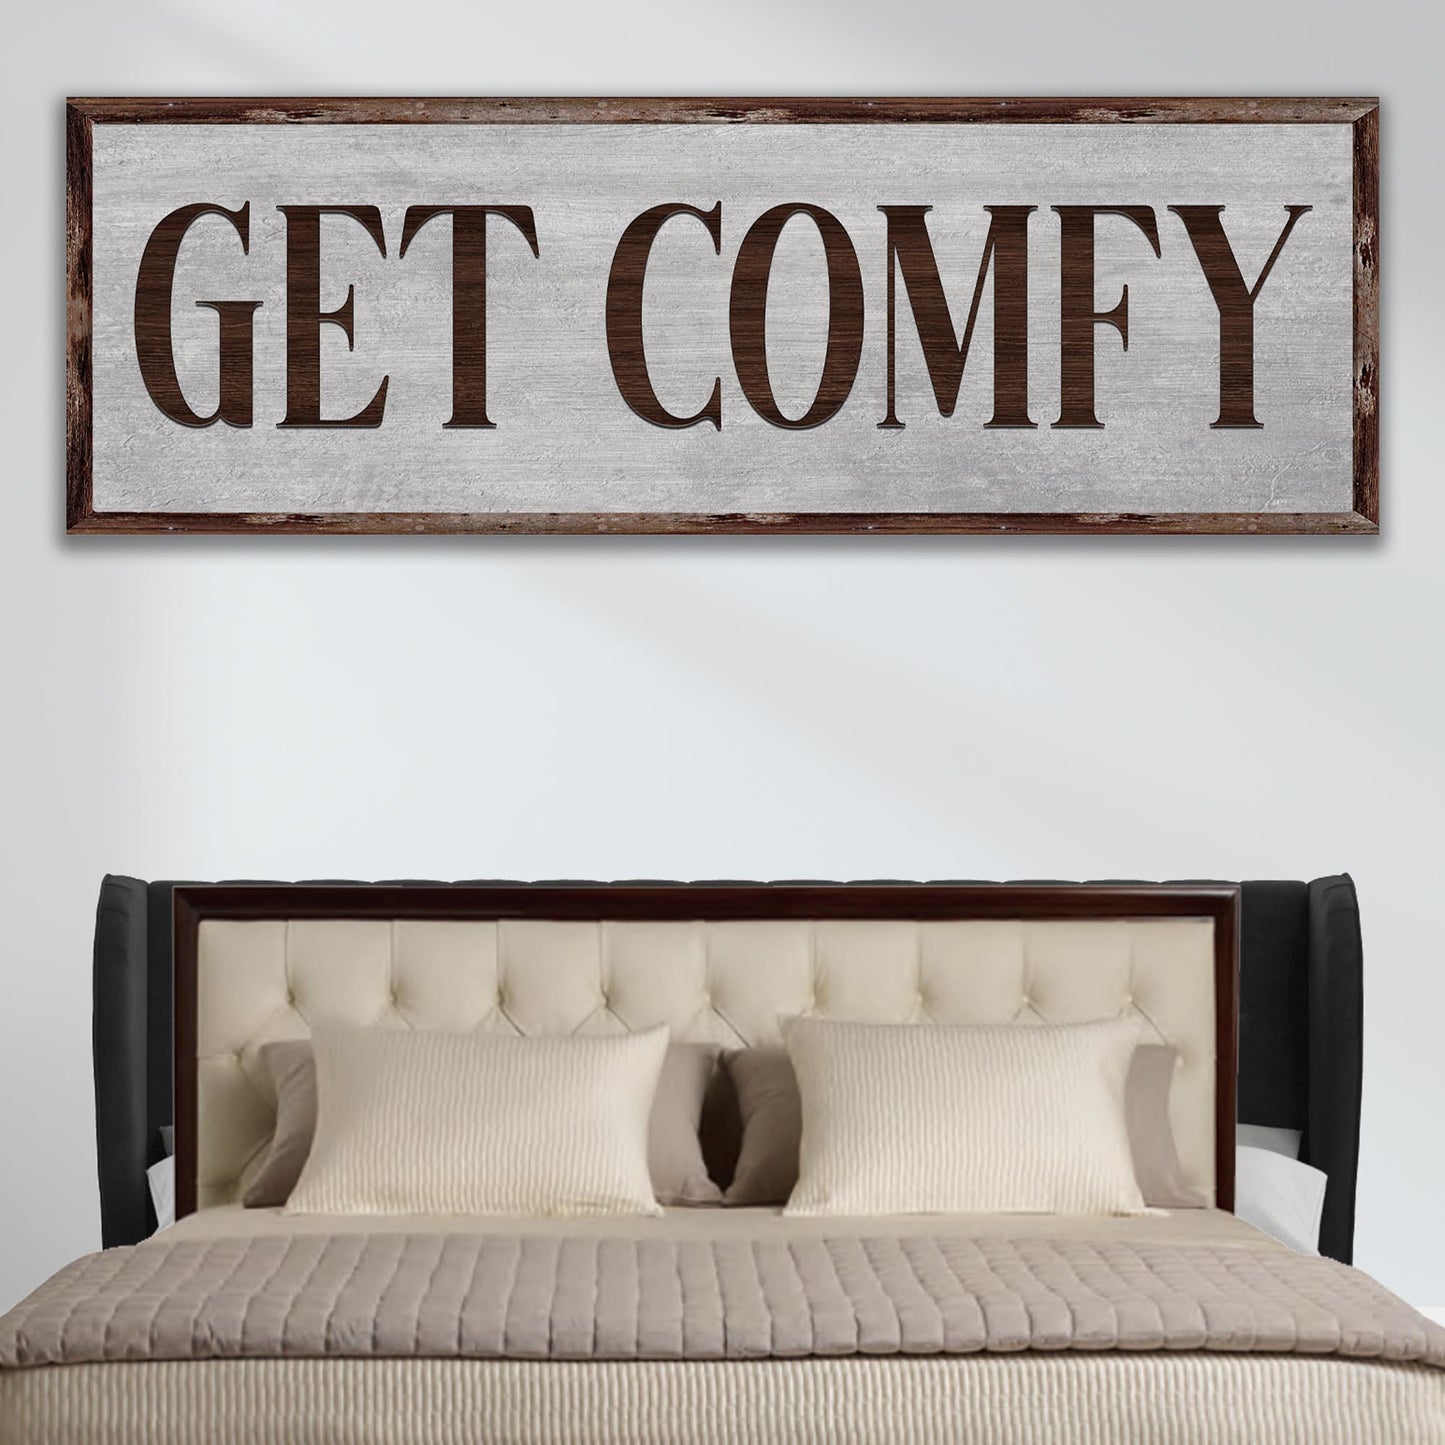 Get Comfy Sign - Image by Tailored Canvases 